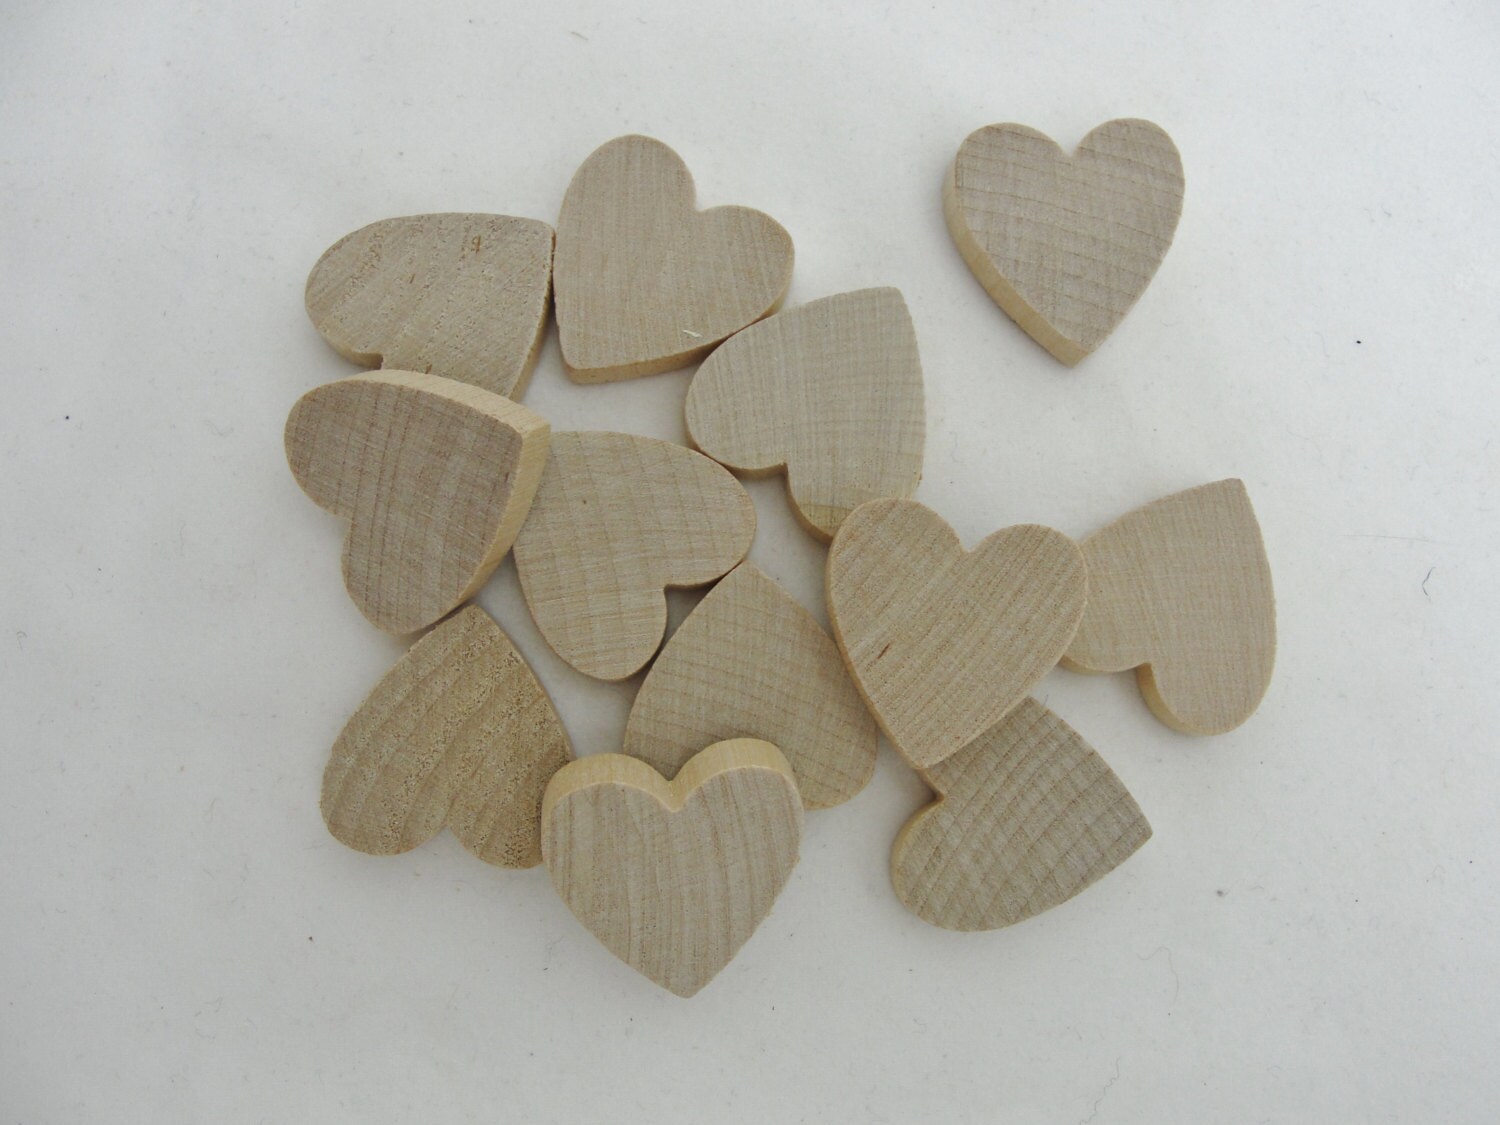 1/4 Thick Unfinished Wood Heart Shape Wooden Heart Shape for DIY Crafts  Large Heart Shape Small Heart Shape 